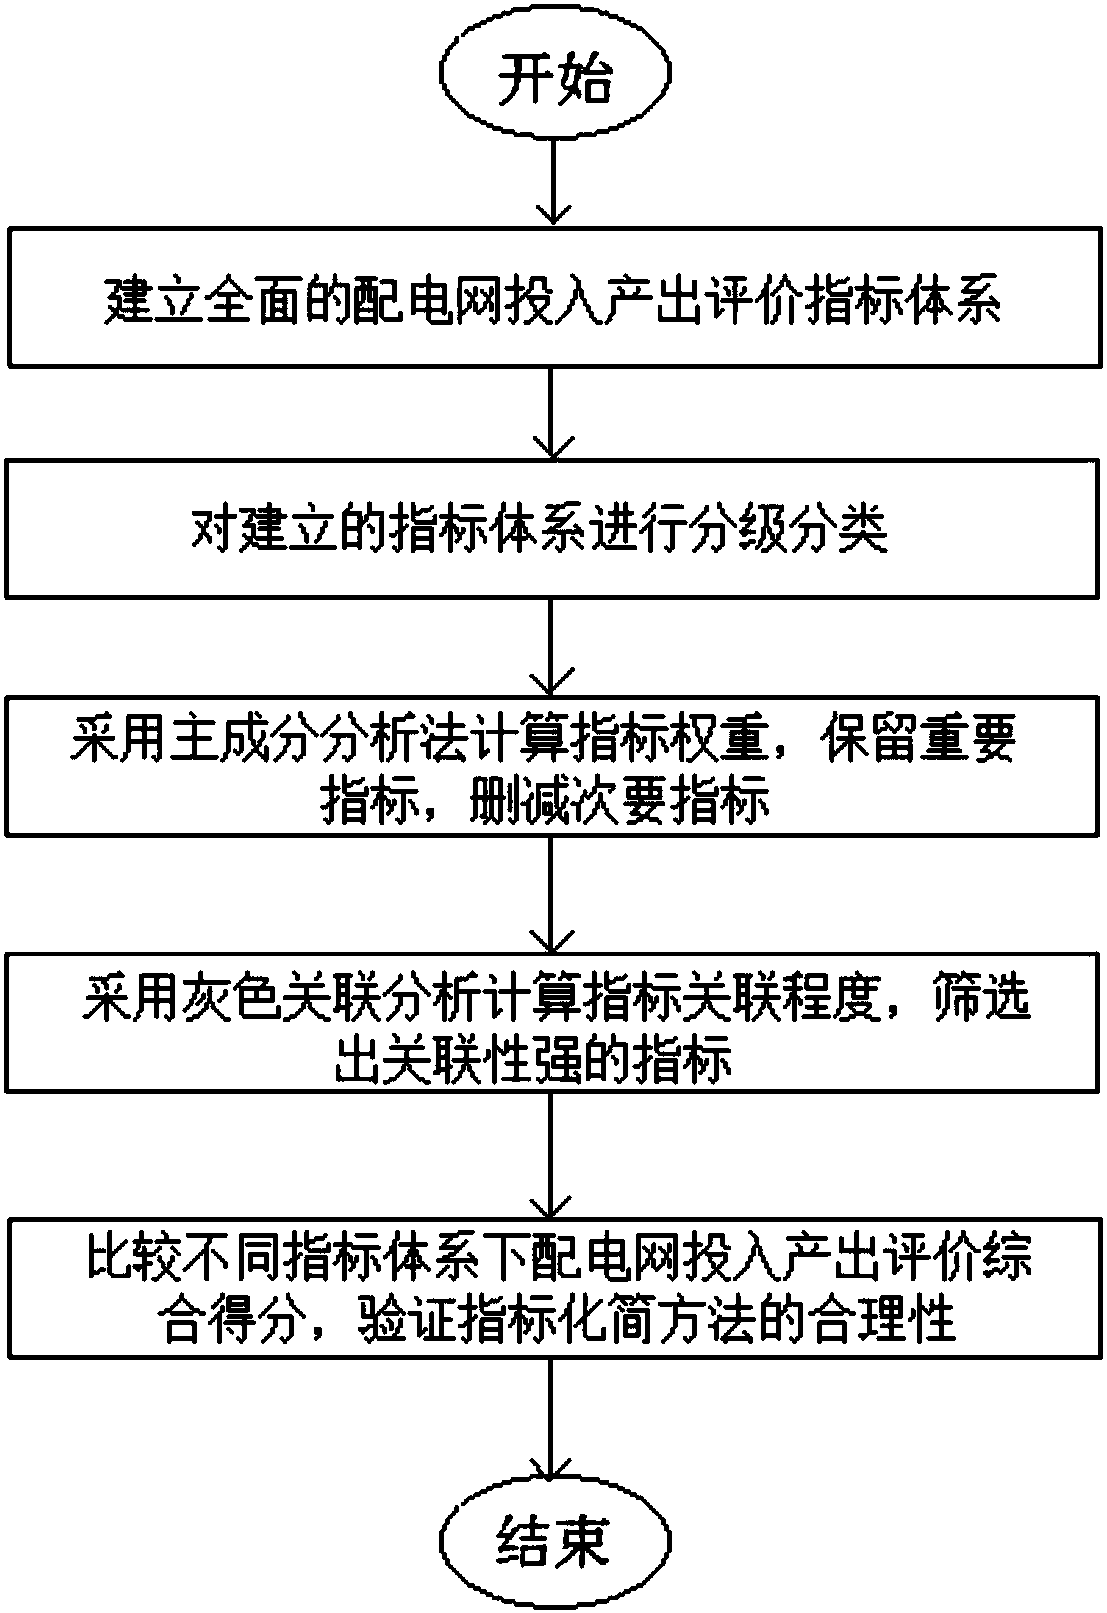 Power distribution network input and output evaluation system index simplification method